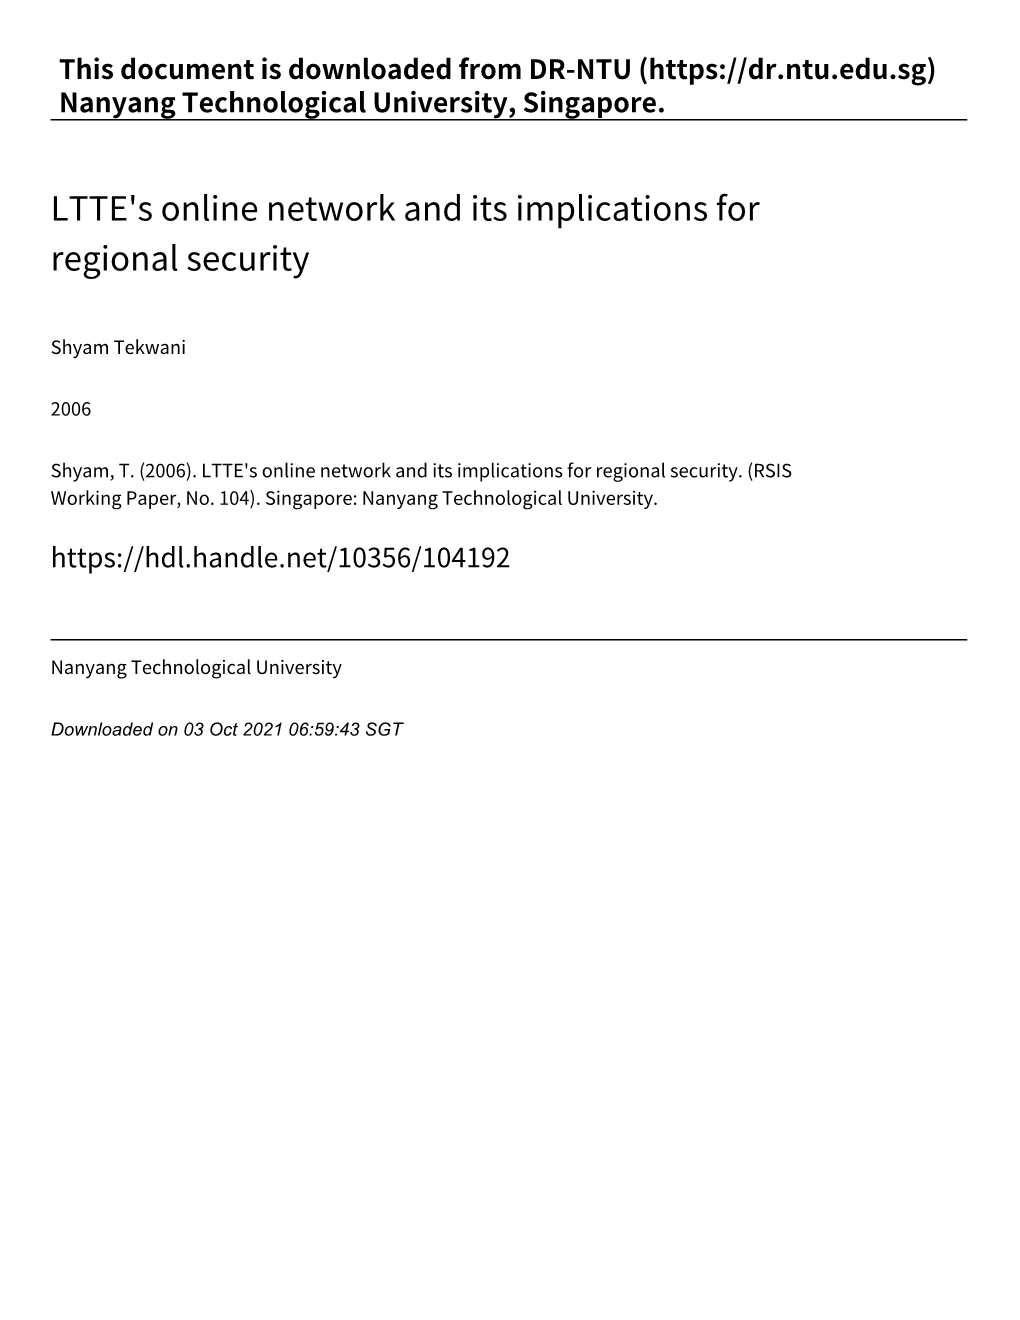 LTTE's Online Network and Its Implications for Regional Security